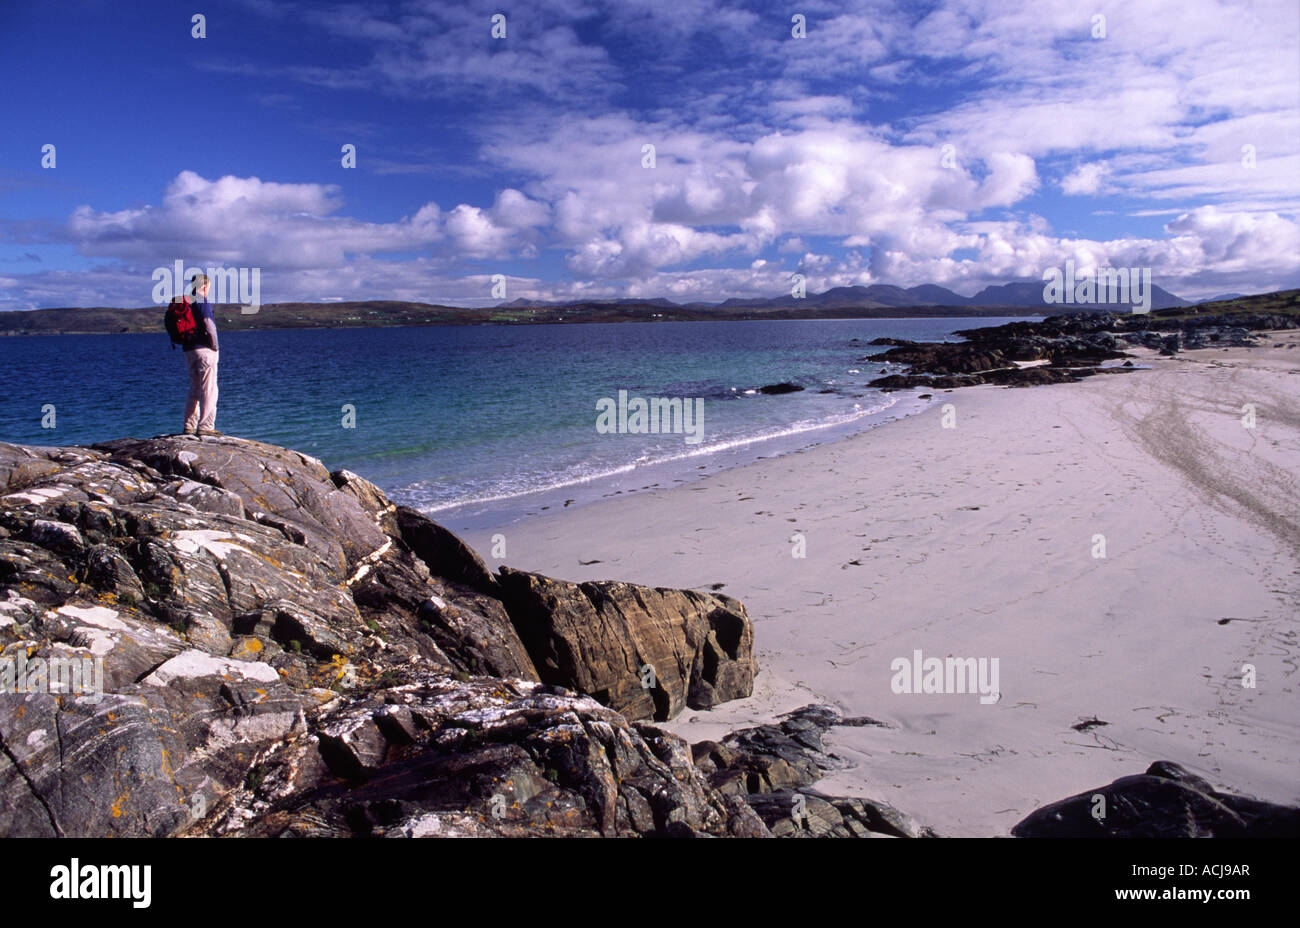 Hiker looking over a sandy beach on the shore of Mannin Bay, Connemara, County Galway, Ireland. Stock Photo